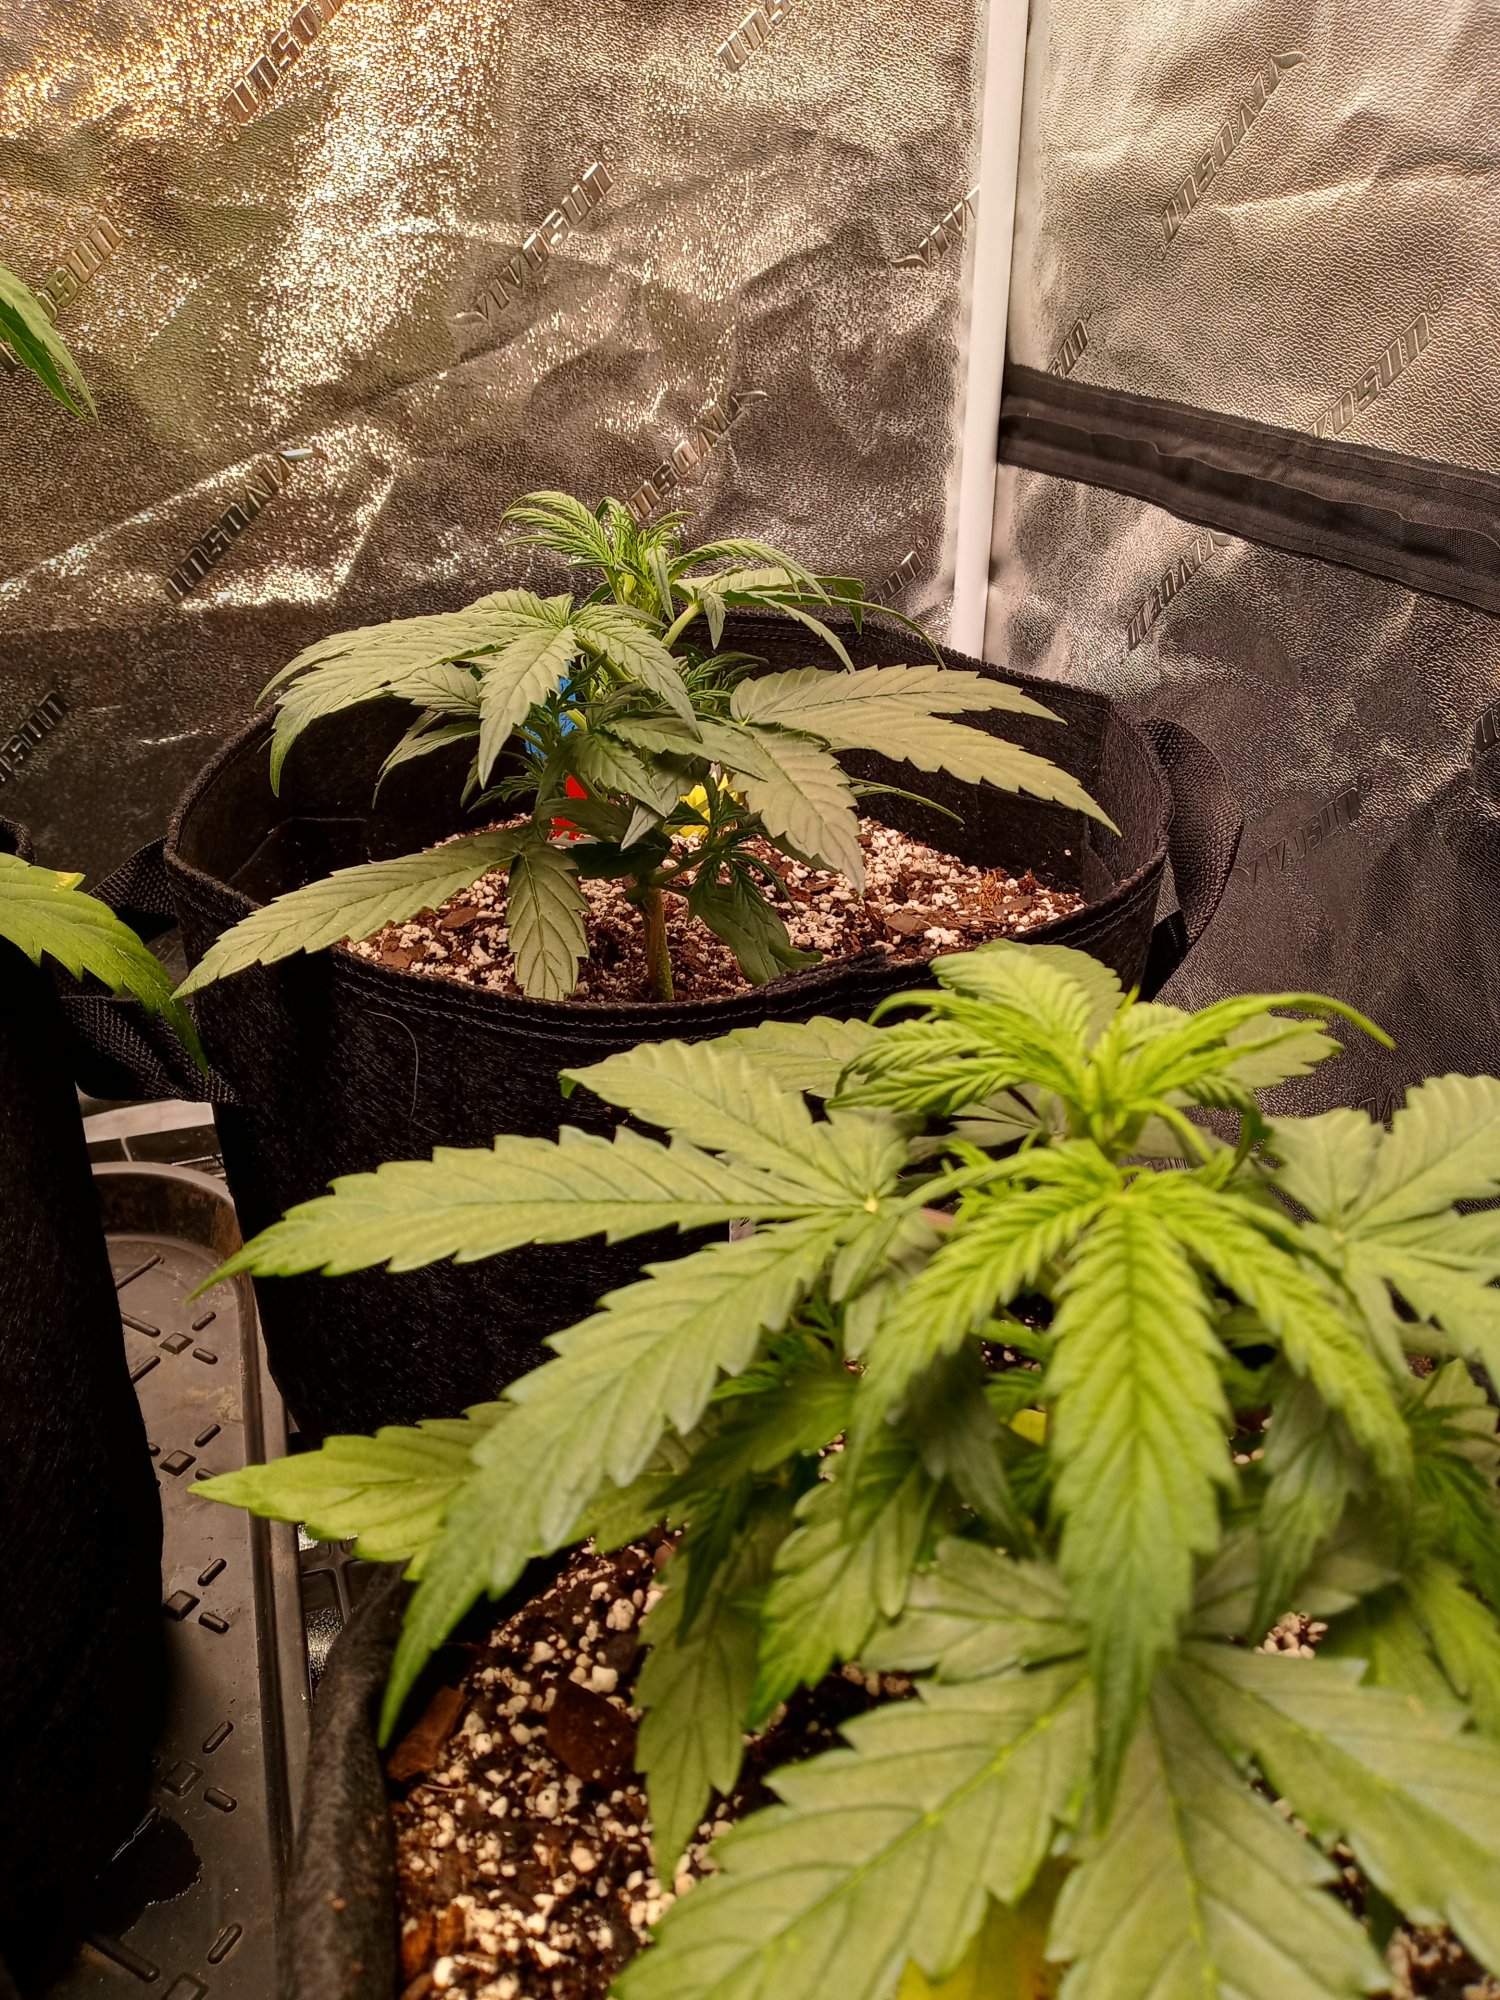 New to autos indoor and dwc trying a lil of each lolhows my grow 15